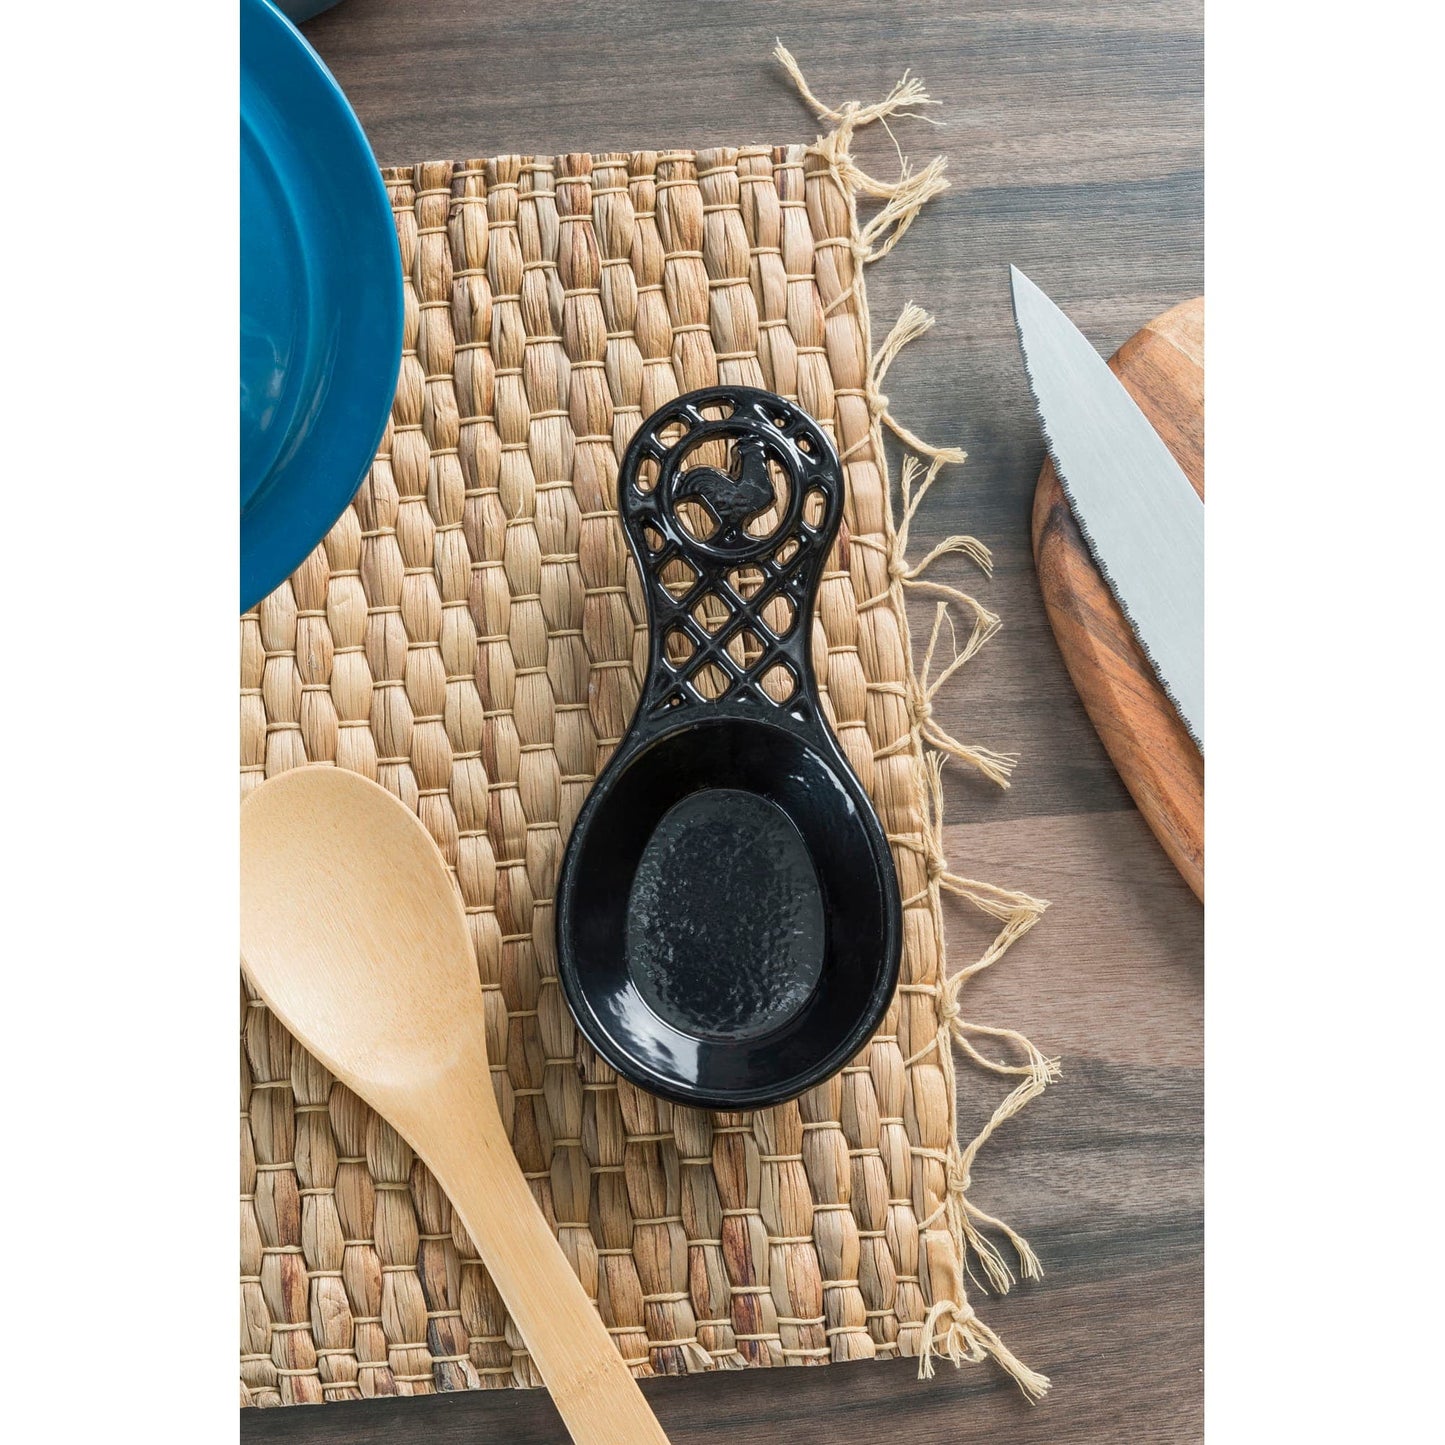 Cast Iron Rooster Spoon Rest, Black